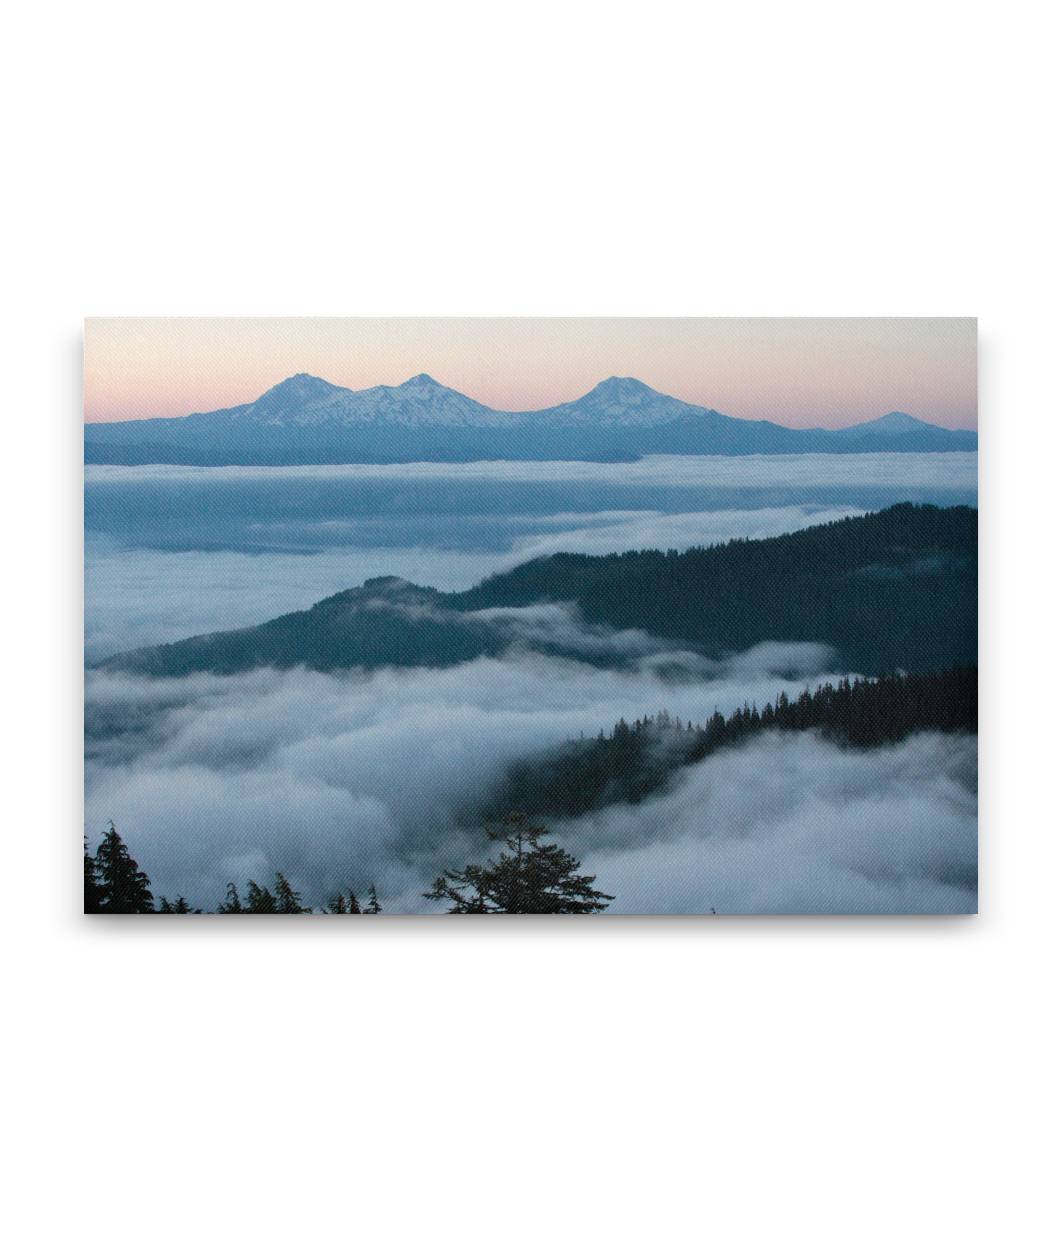 Three Sisters Wilderness and Marine Layer, Willamette National Forest, Oregon